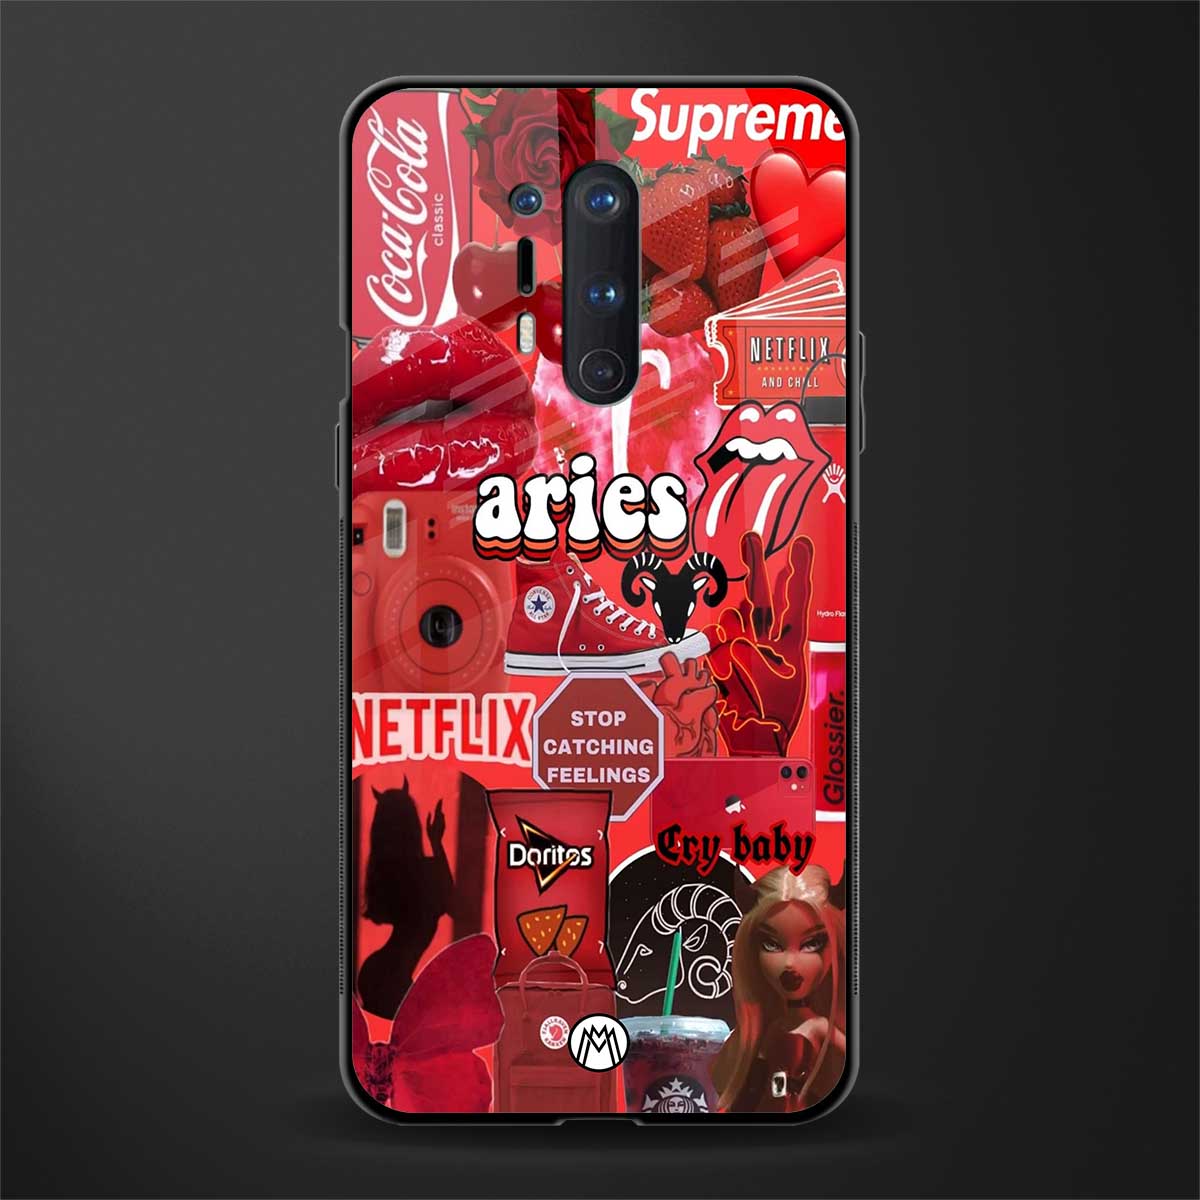 aries aesthetic collage glass case for oneplus 8 pro image